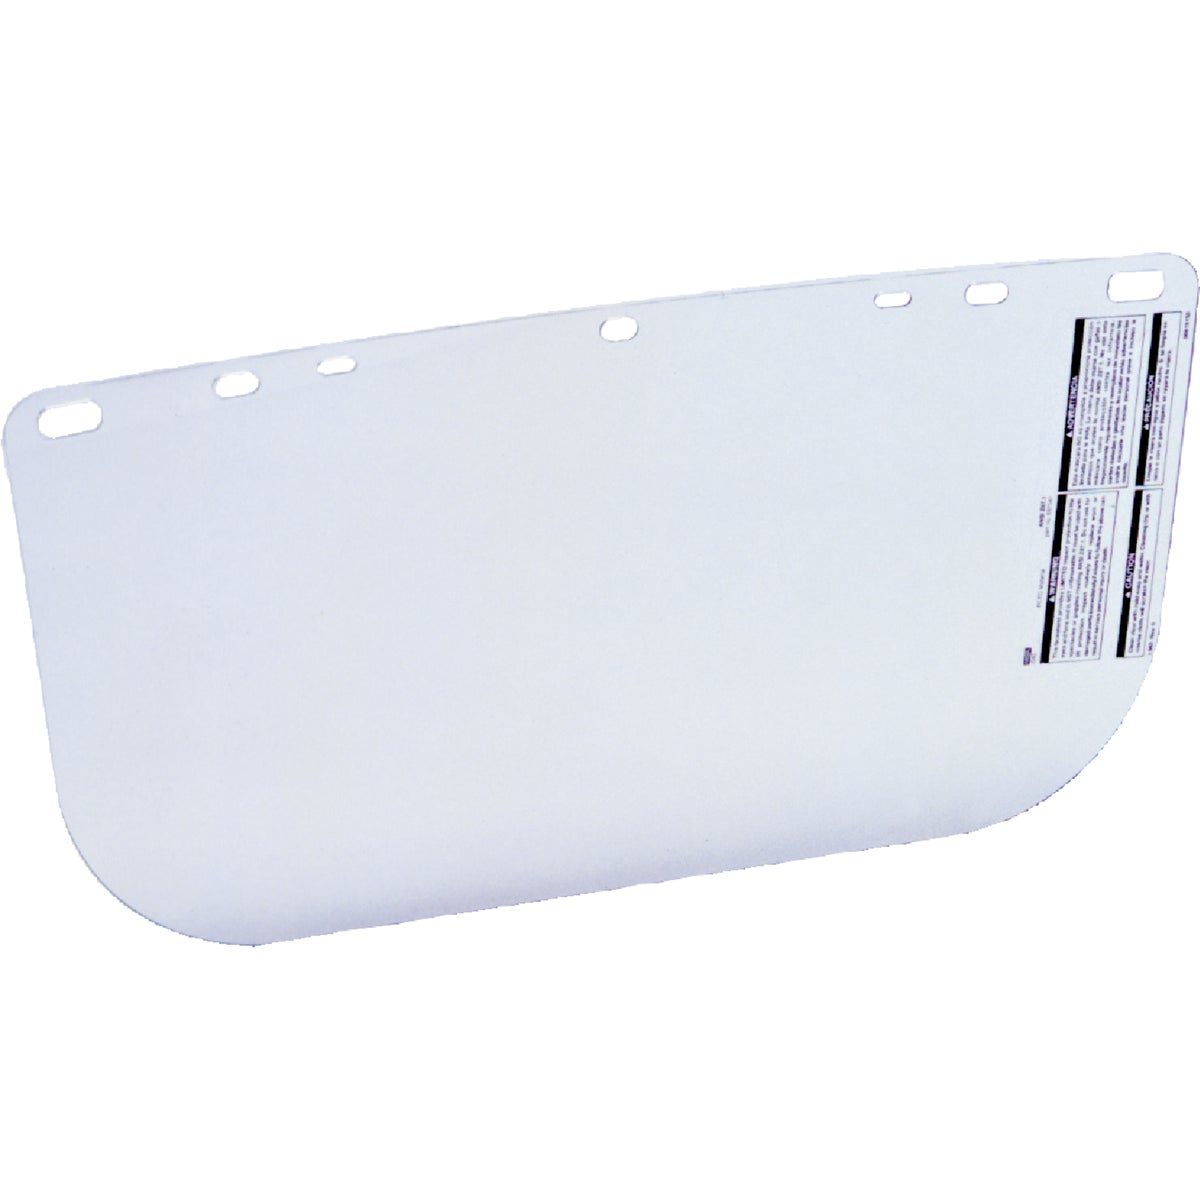 Item 365090, Replacement face shield for Safety Works face shield visor.